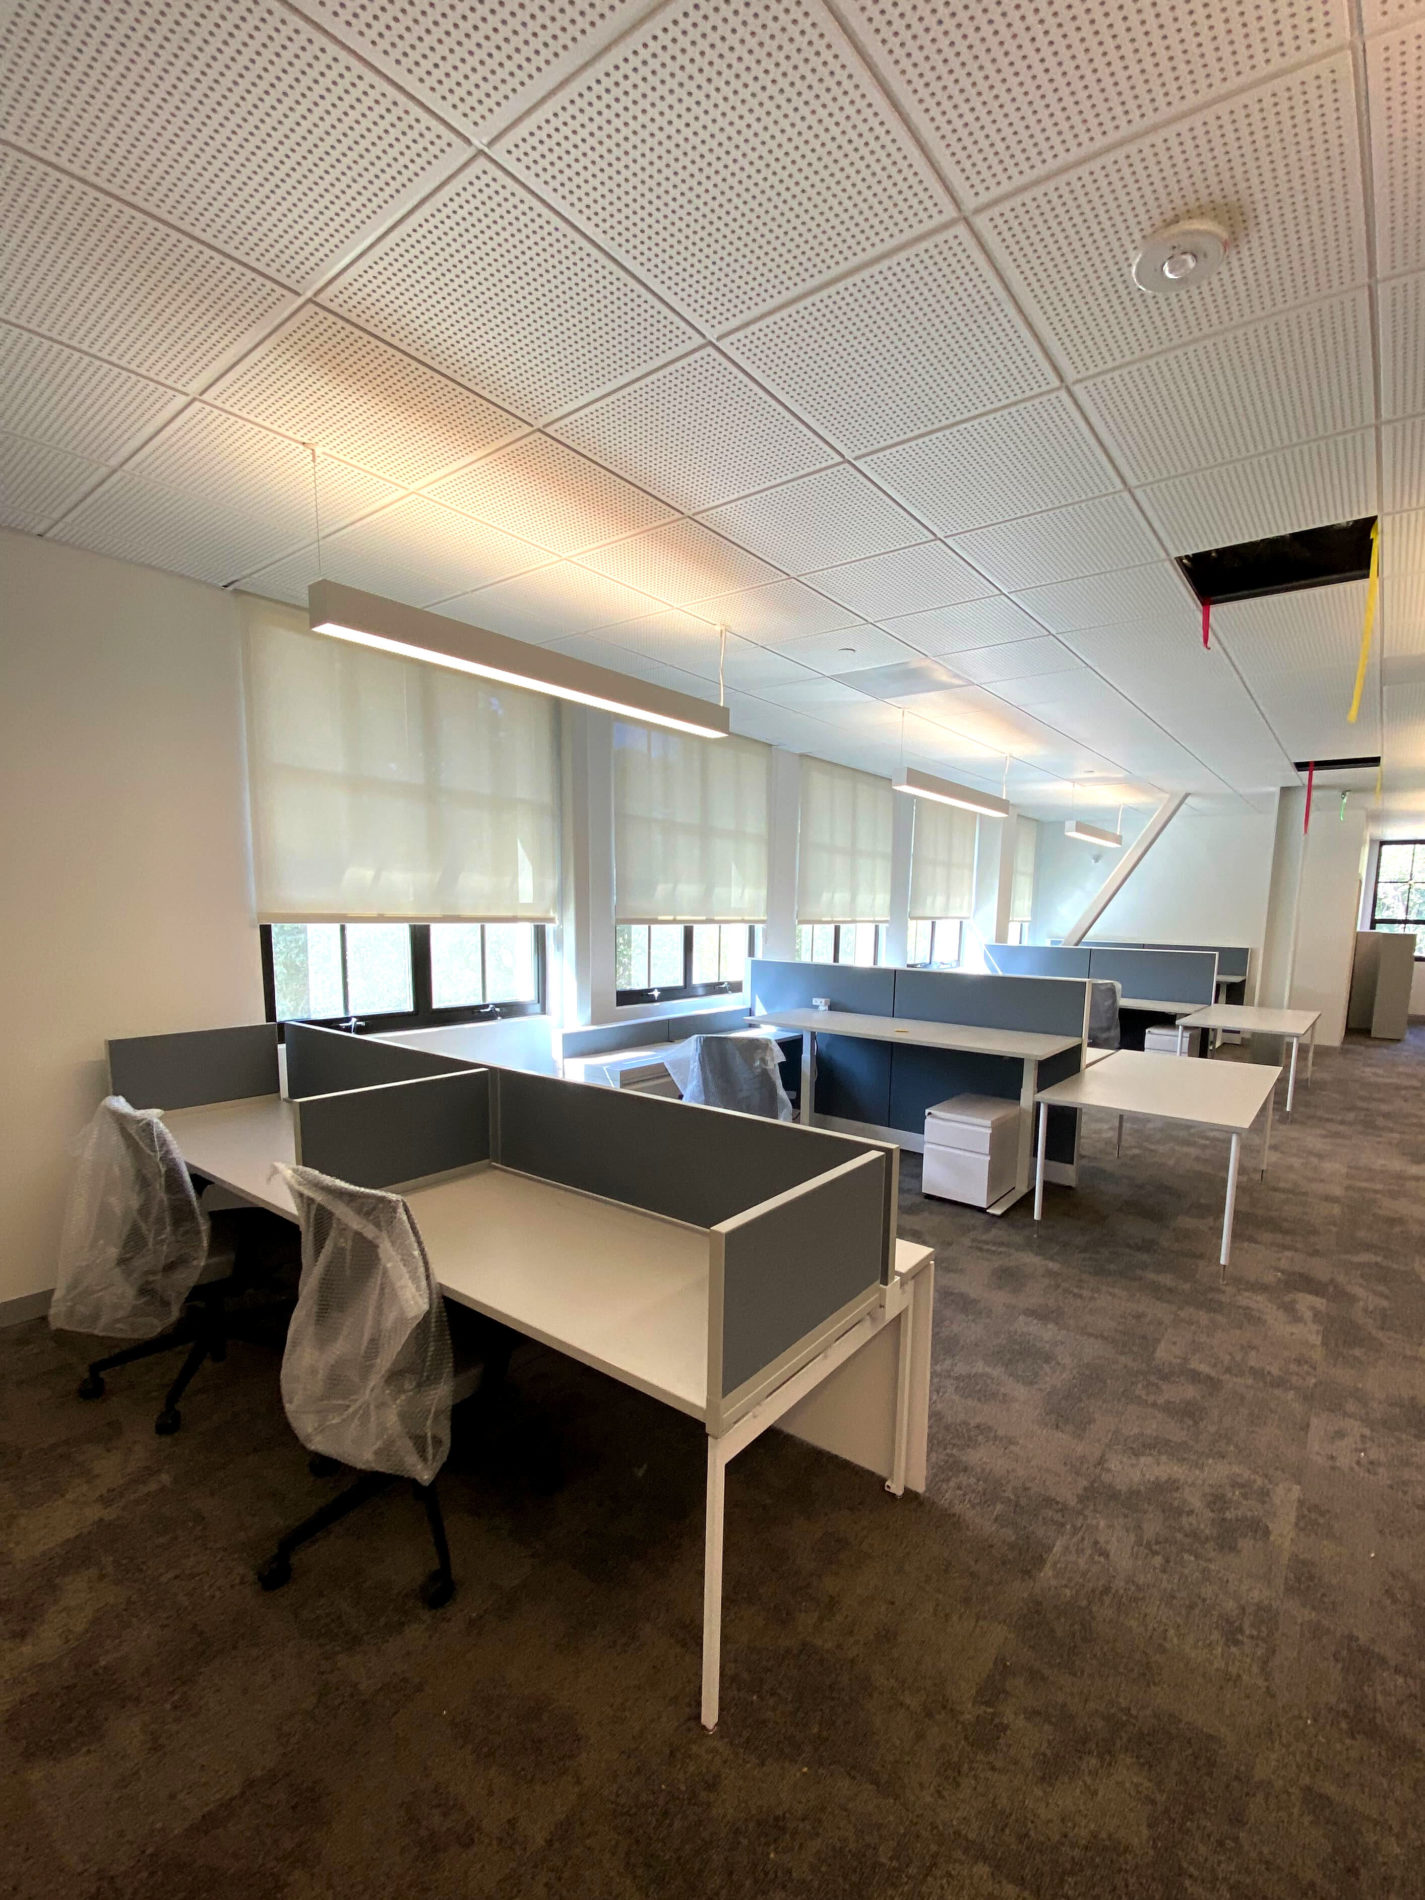 Atherton Civic Center offices with Ray Magic® Quad ceiling tiles (for heating and cooling).